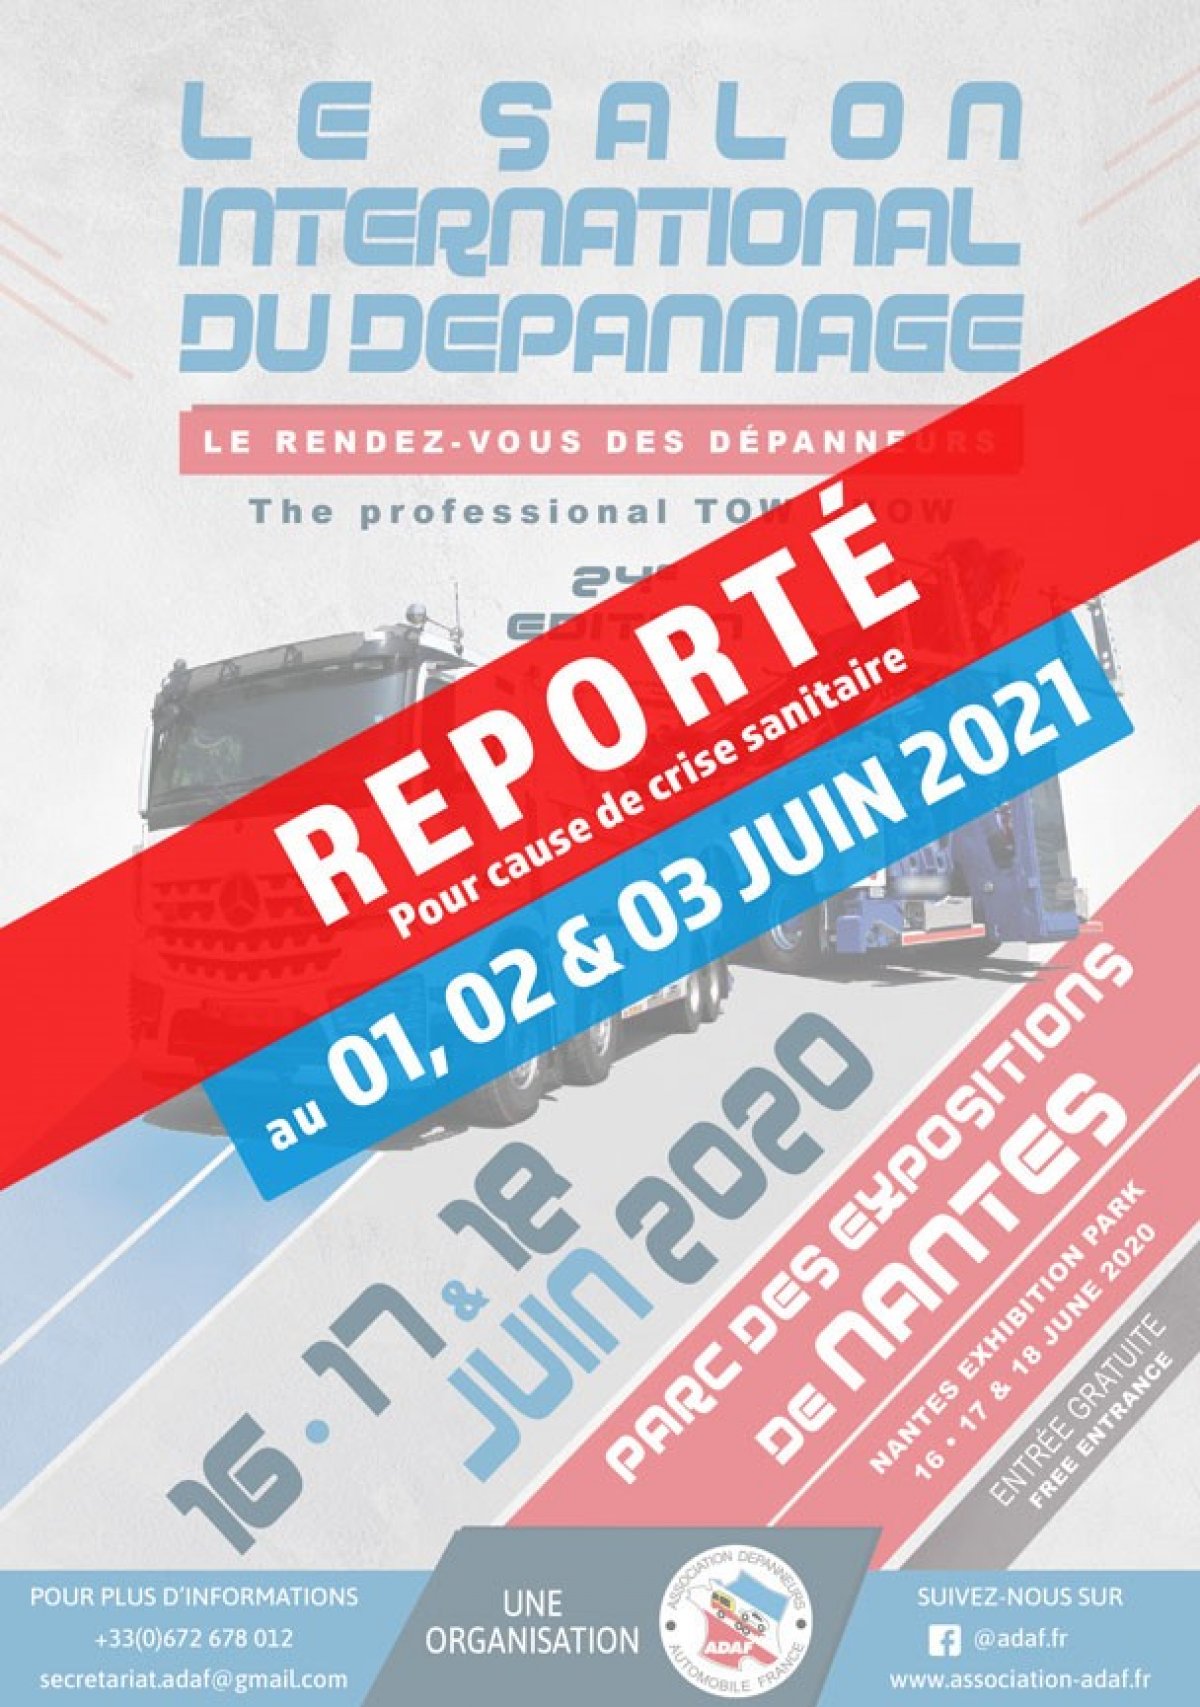 Tow show in nantes (44) is france has been postponed !